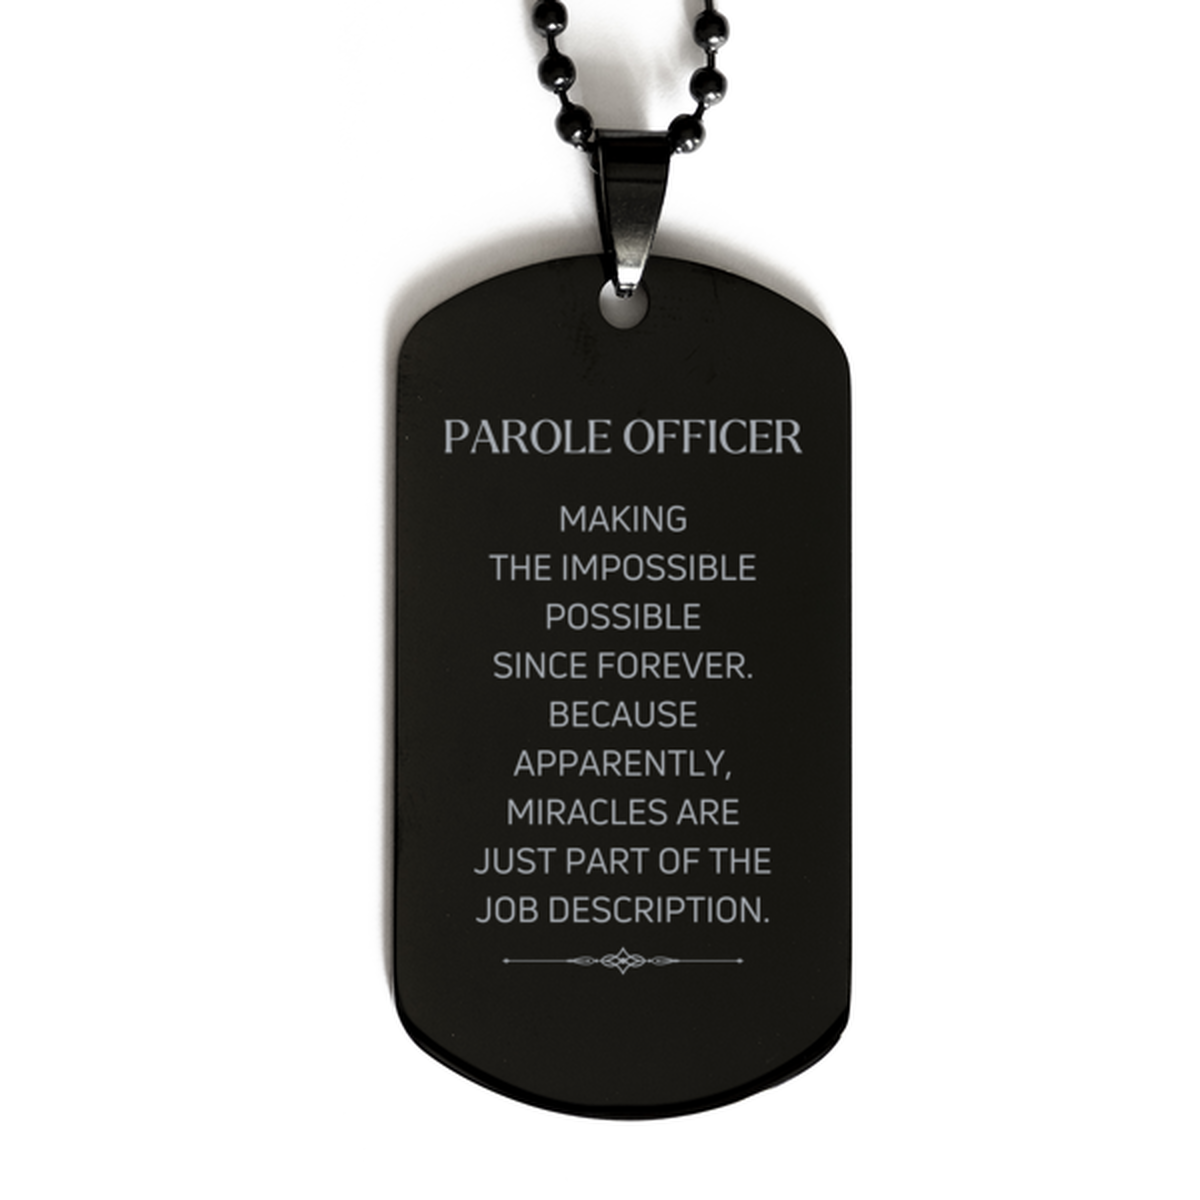 Funny Parole Officer Gifts, Miracles are just part of the job description, Inspirational Birthday Black Dog Tag For Parole Officer, Men, Women, Coworkers, Friends, Boss